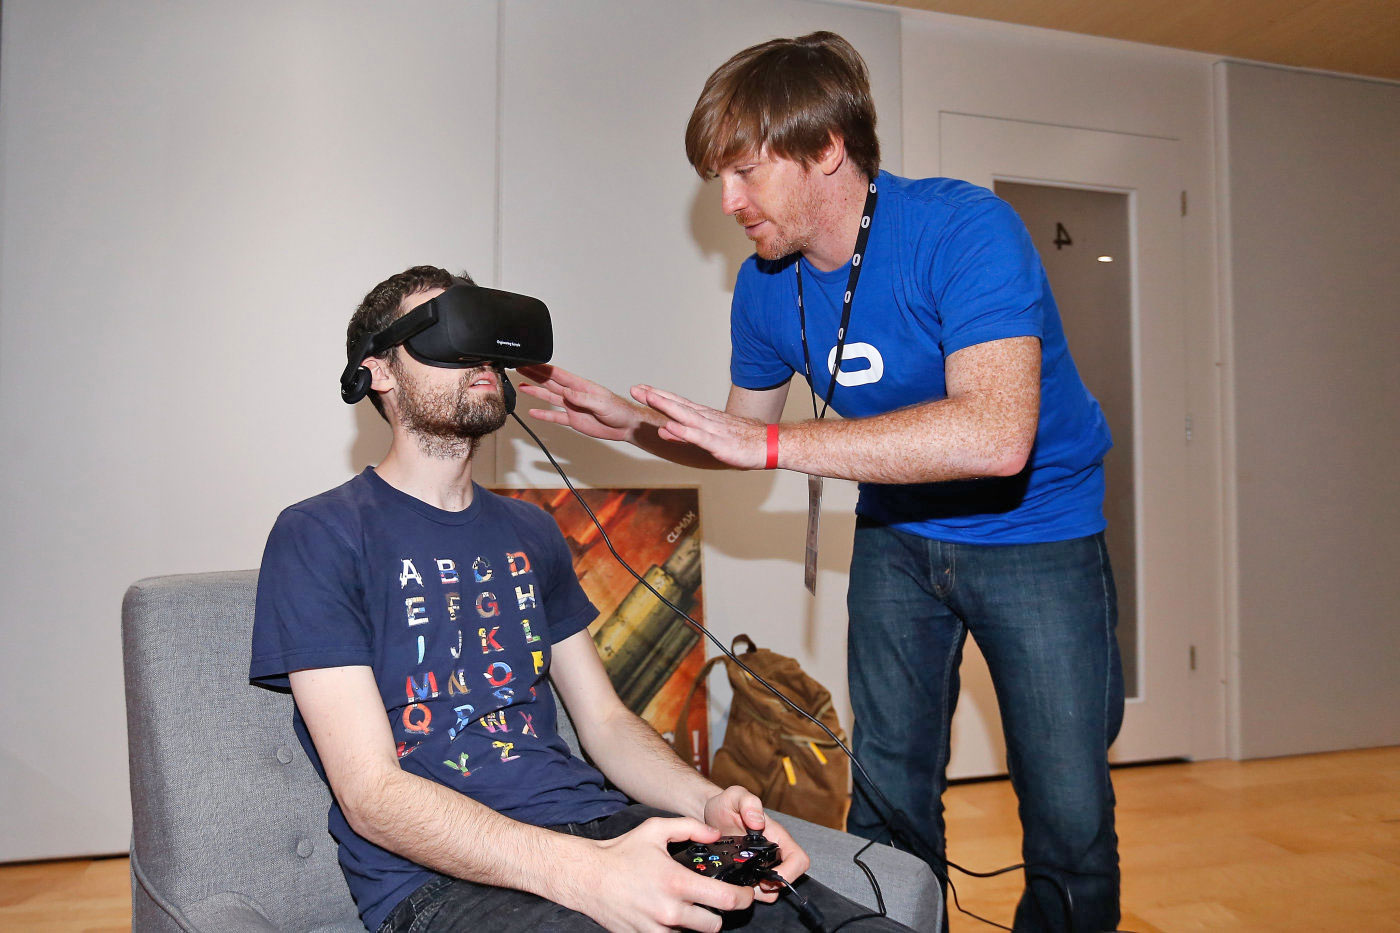 Report: A major developer is working on a VR game for Xbox One